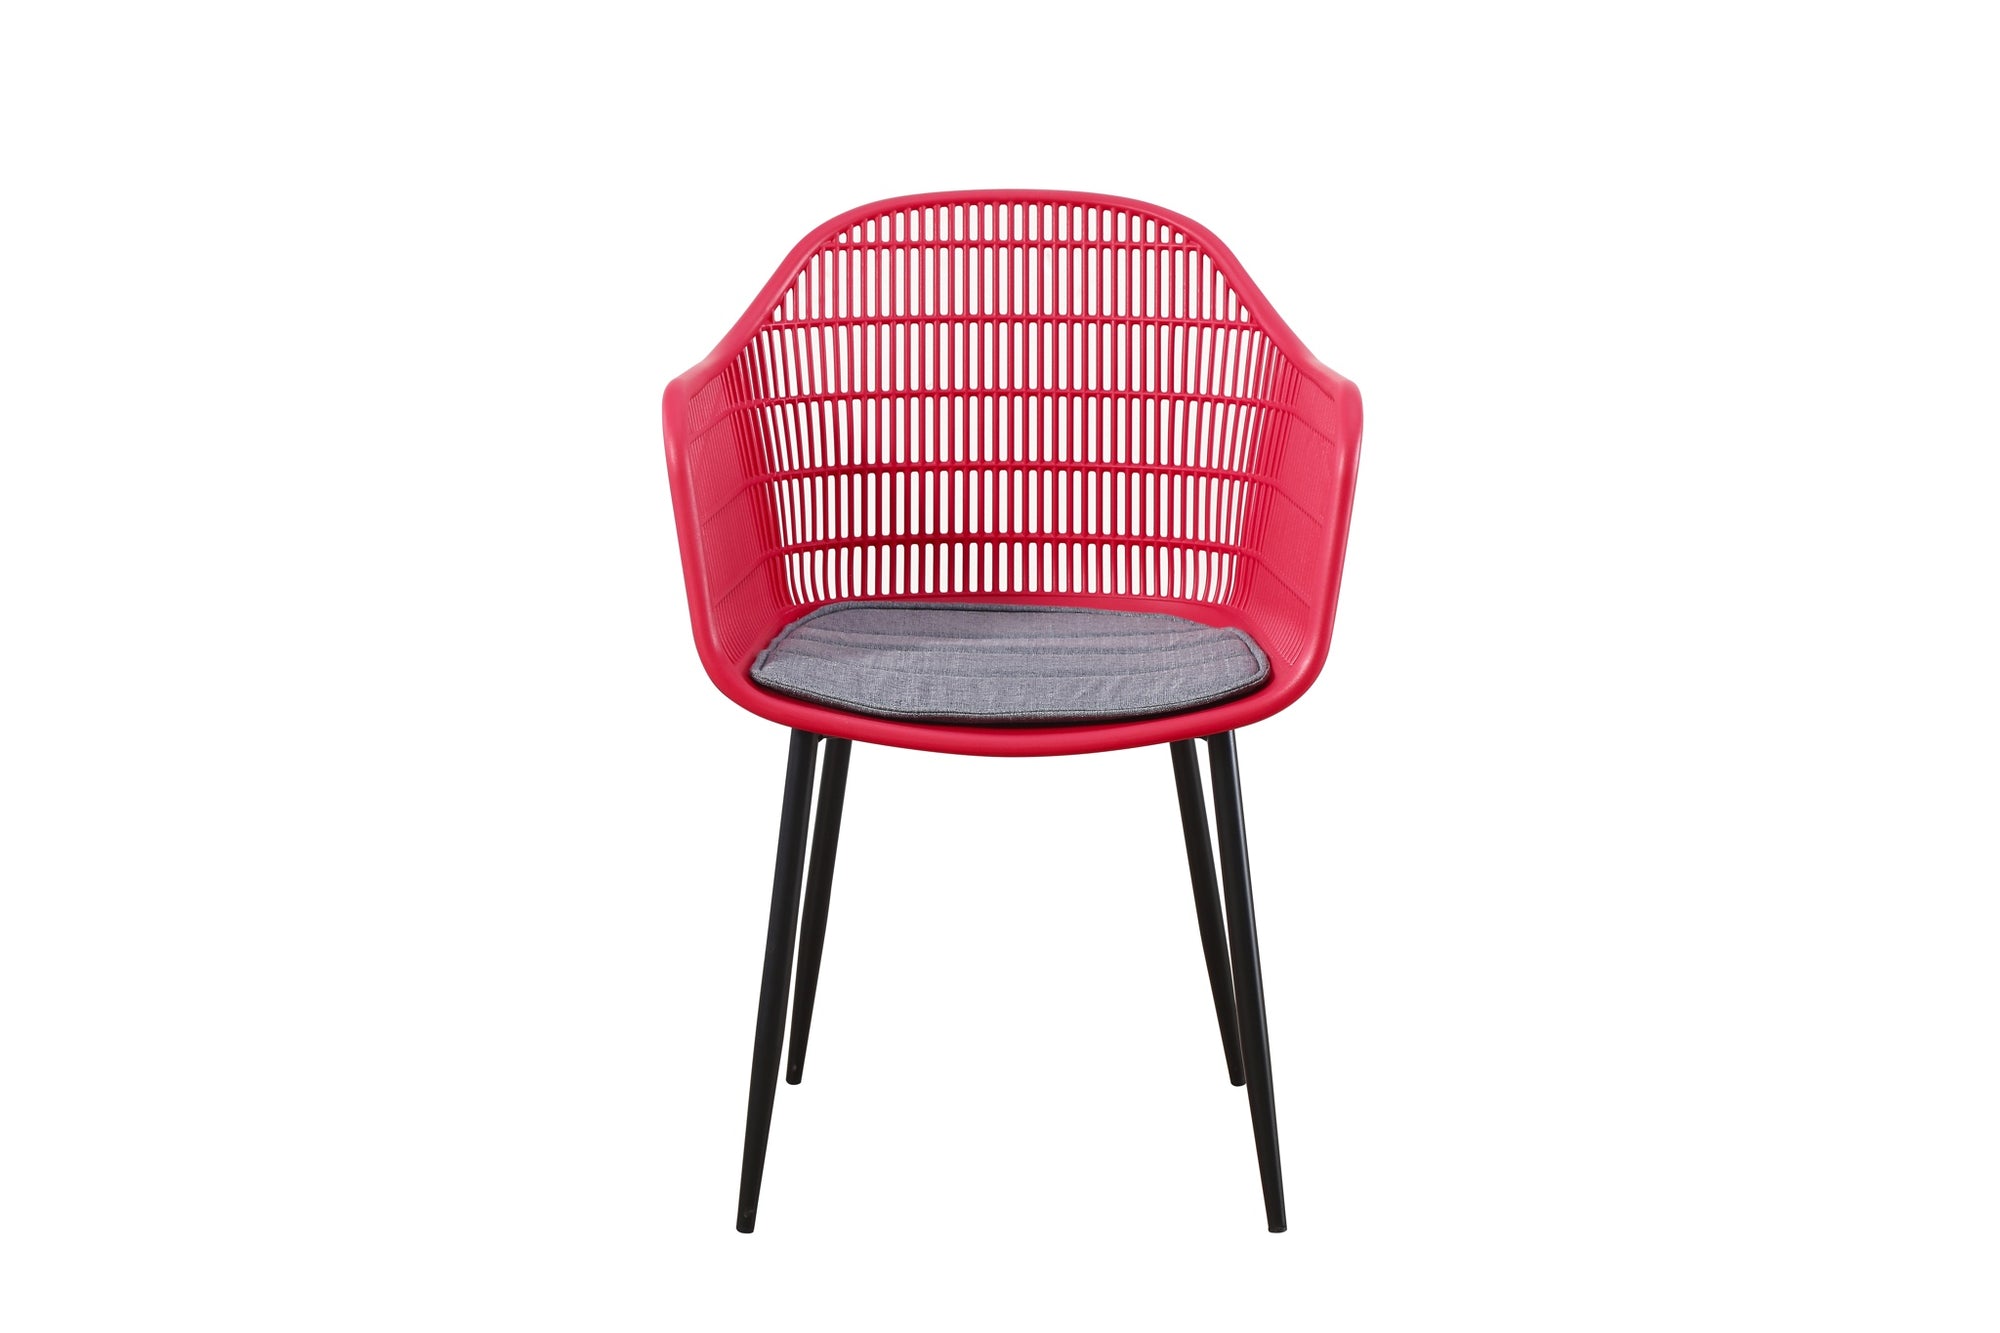 Metro Chair Raspberry Red - Available this June pre order now - Fervor + Hue